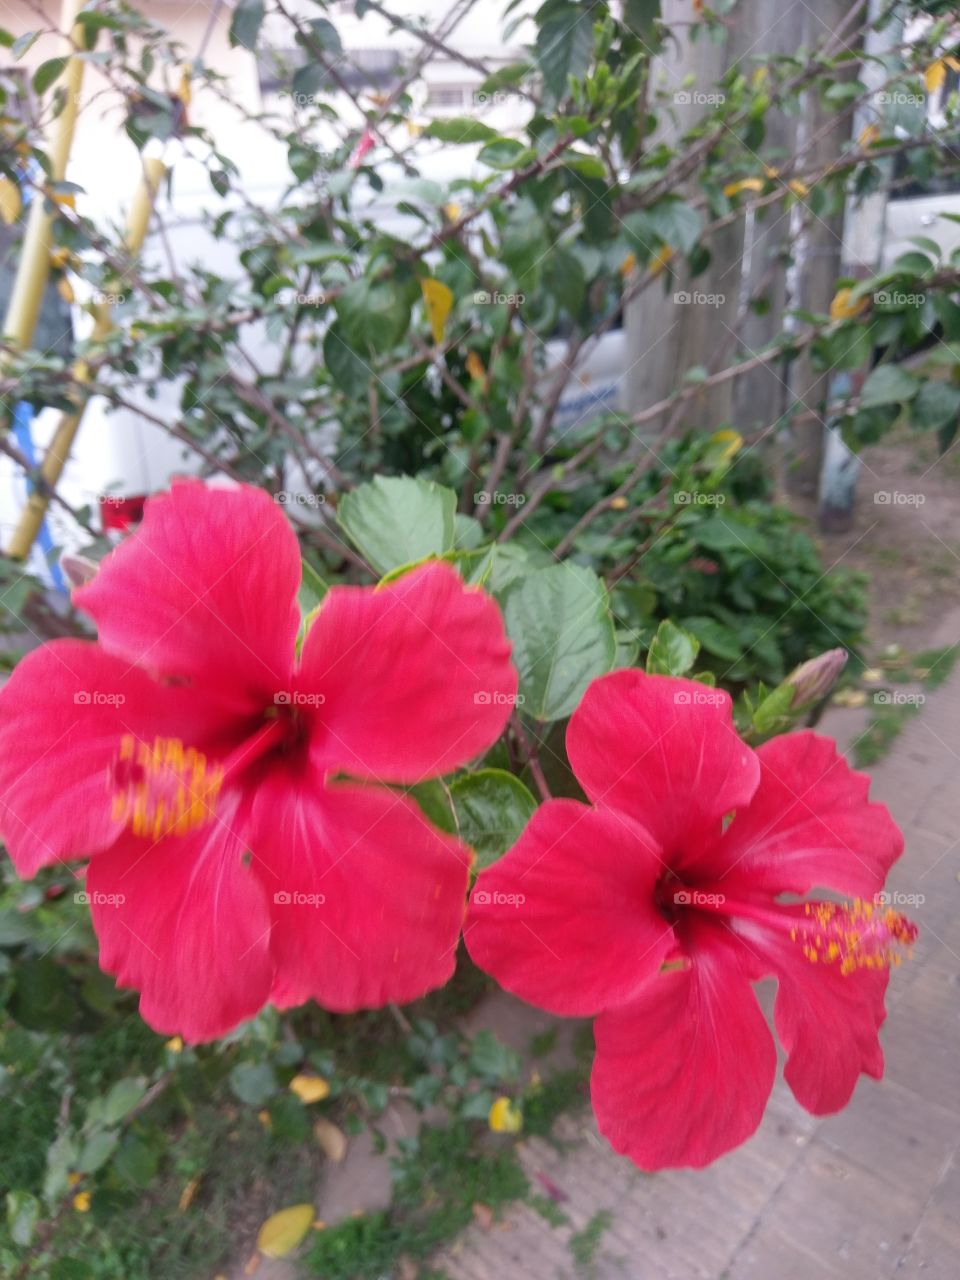 2 Red Spring Flowers.